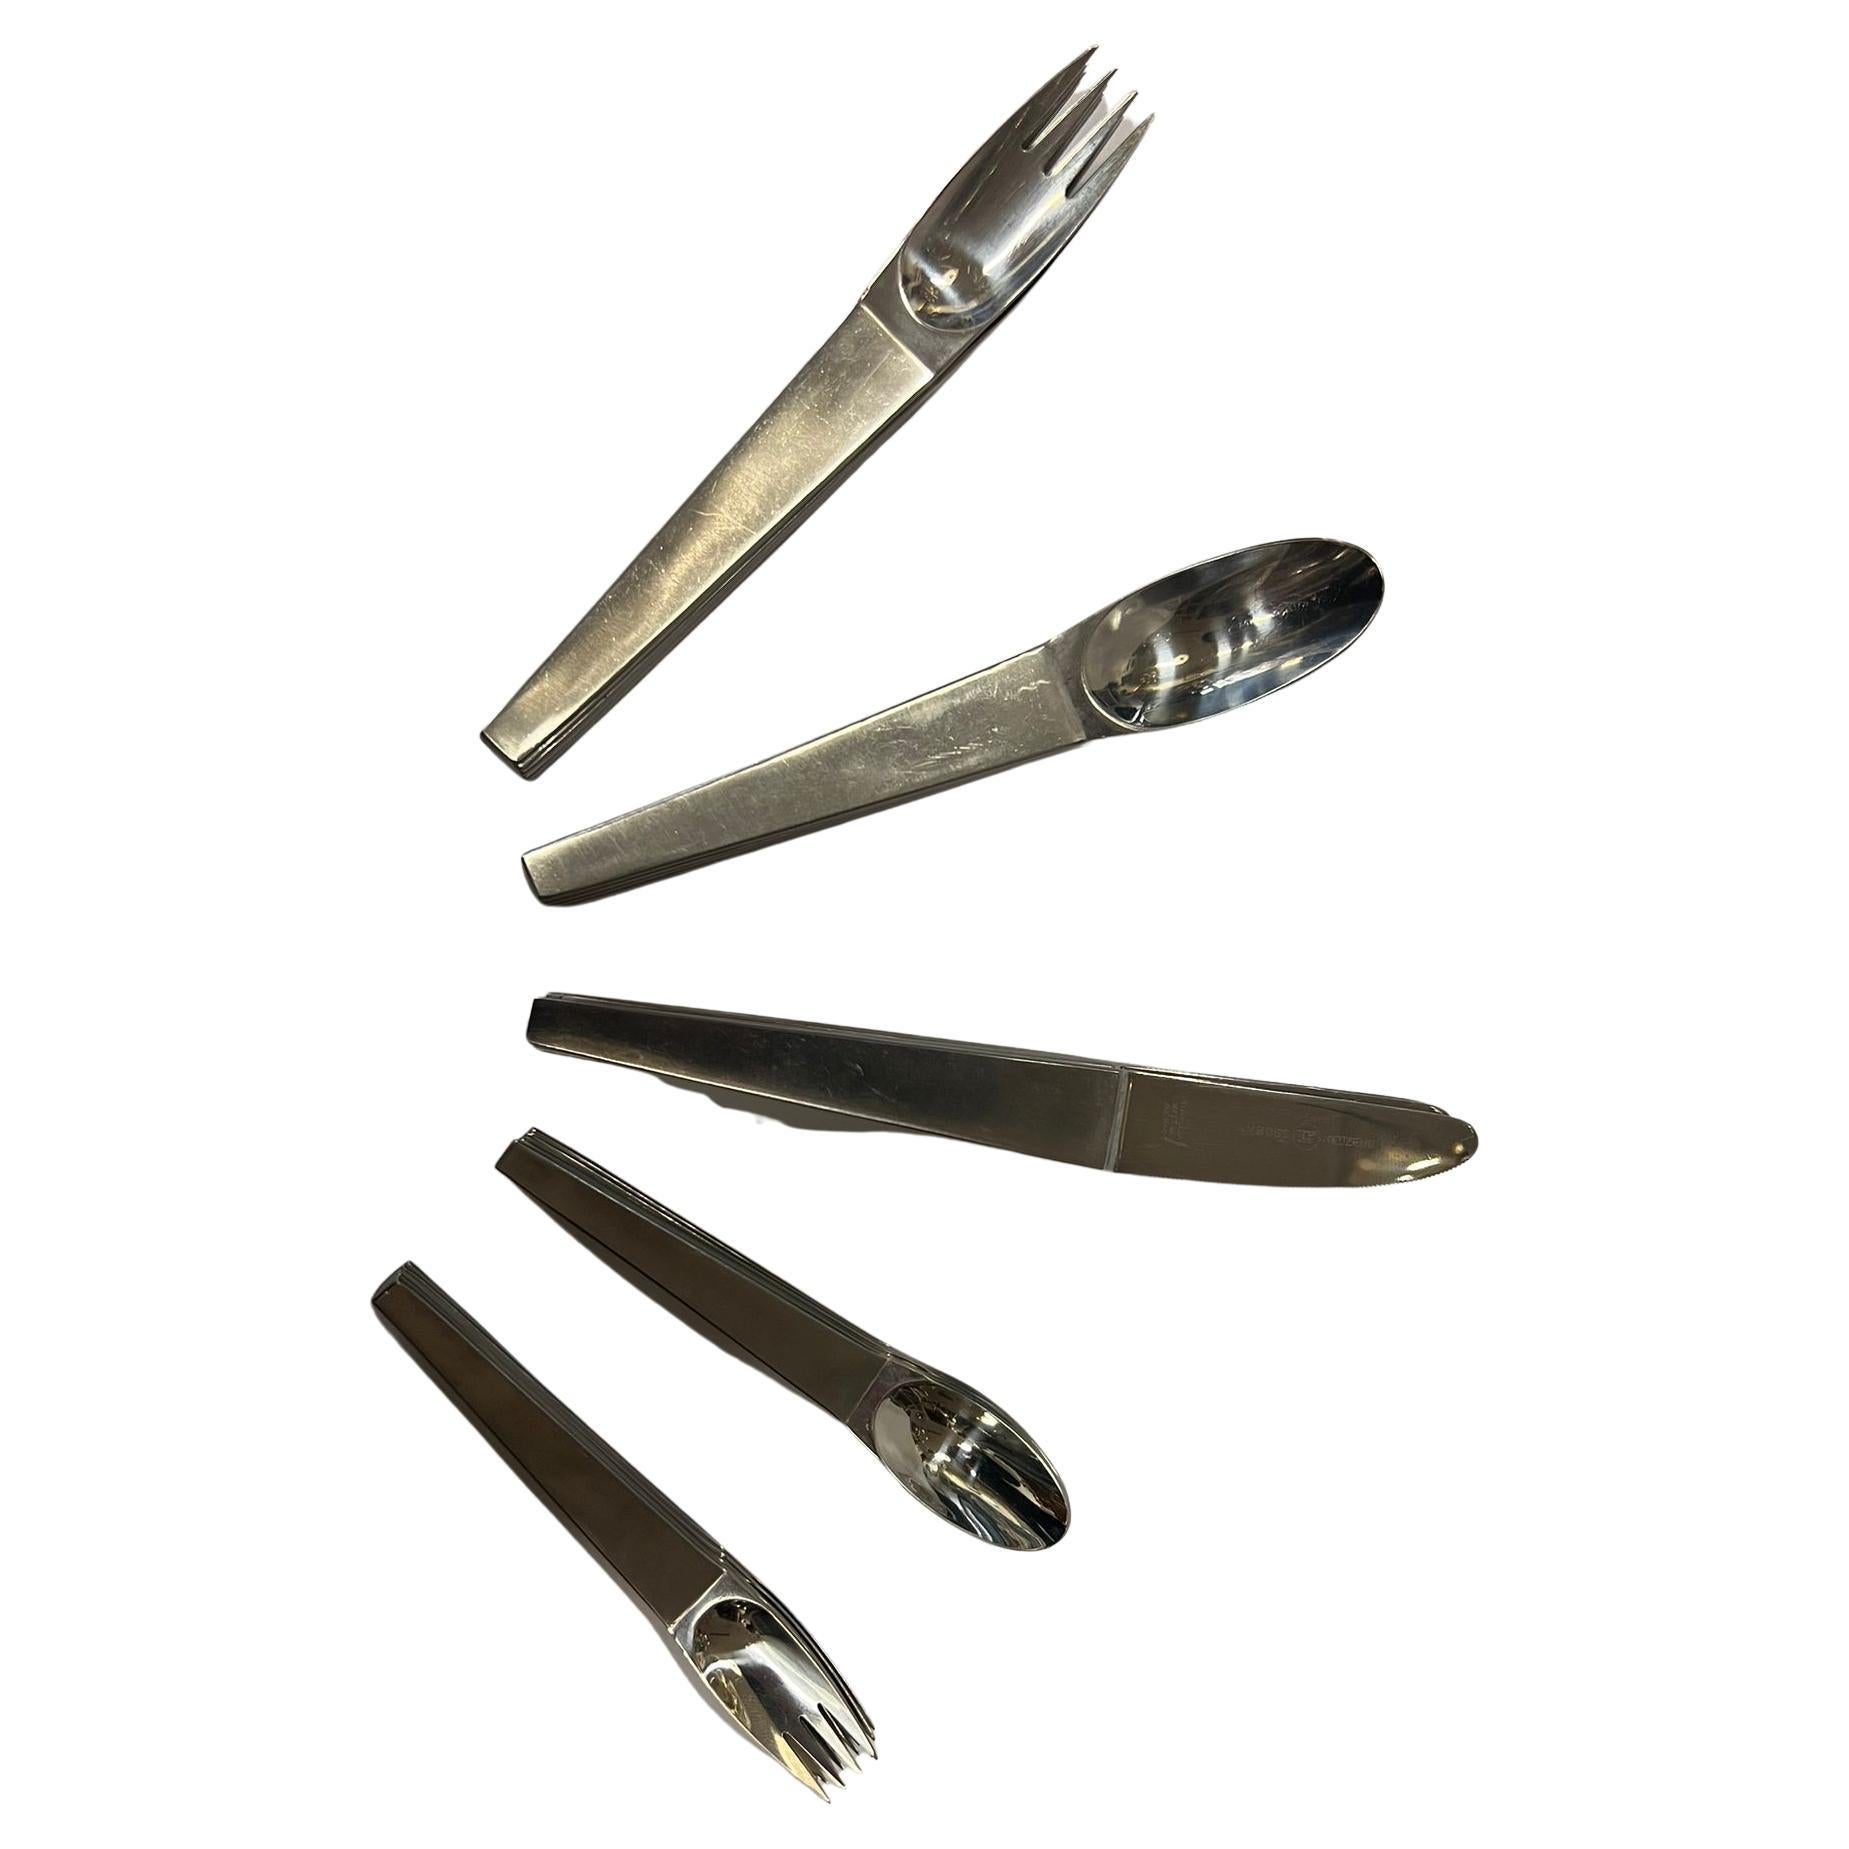 Design Carl Auböck, version Amboss cutlery set, no.2060, 1950 Vienna Austria

consisting of 6 knives, 6 spoons, 6 forks, 6 coffee spoons, 6 cake forks.